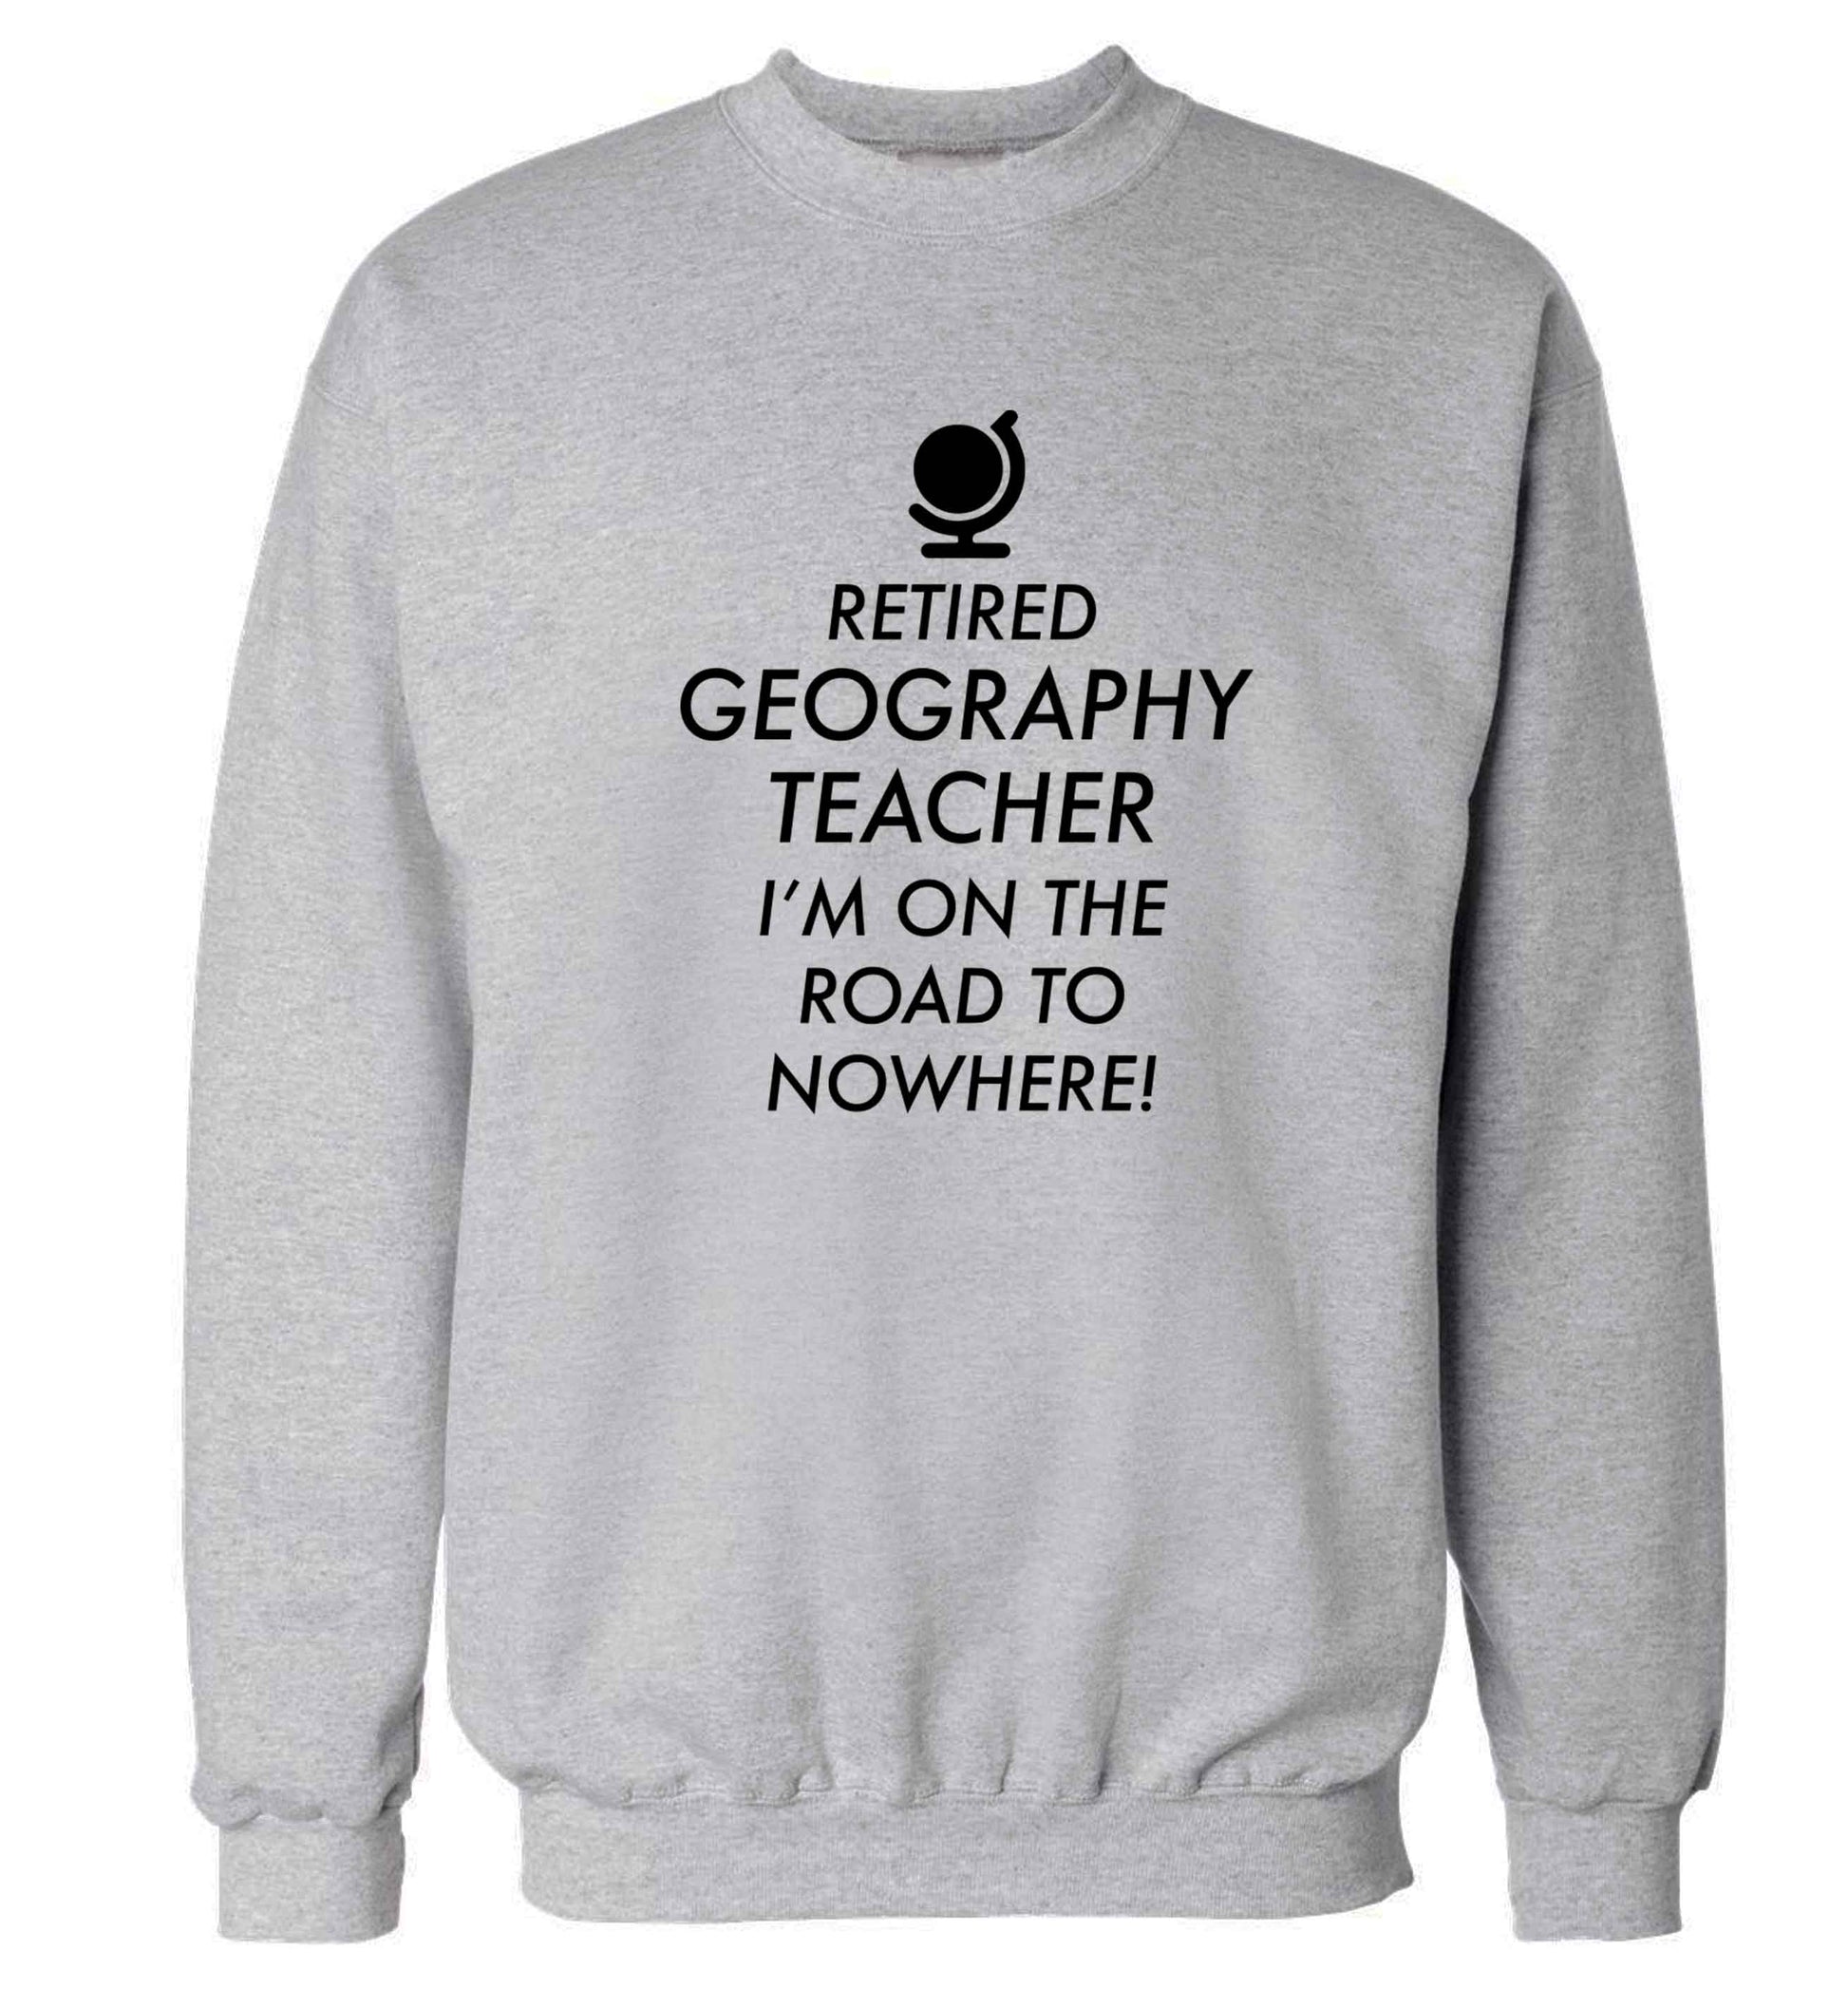 Retired geography teacher I'm on the road to nowhere Adult's unisex grey Sweater 2XL